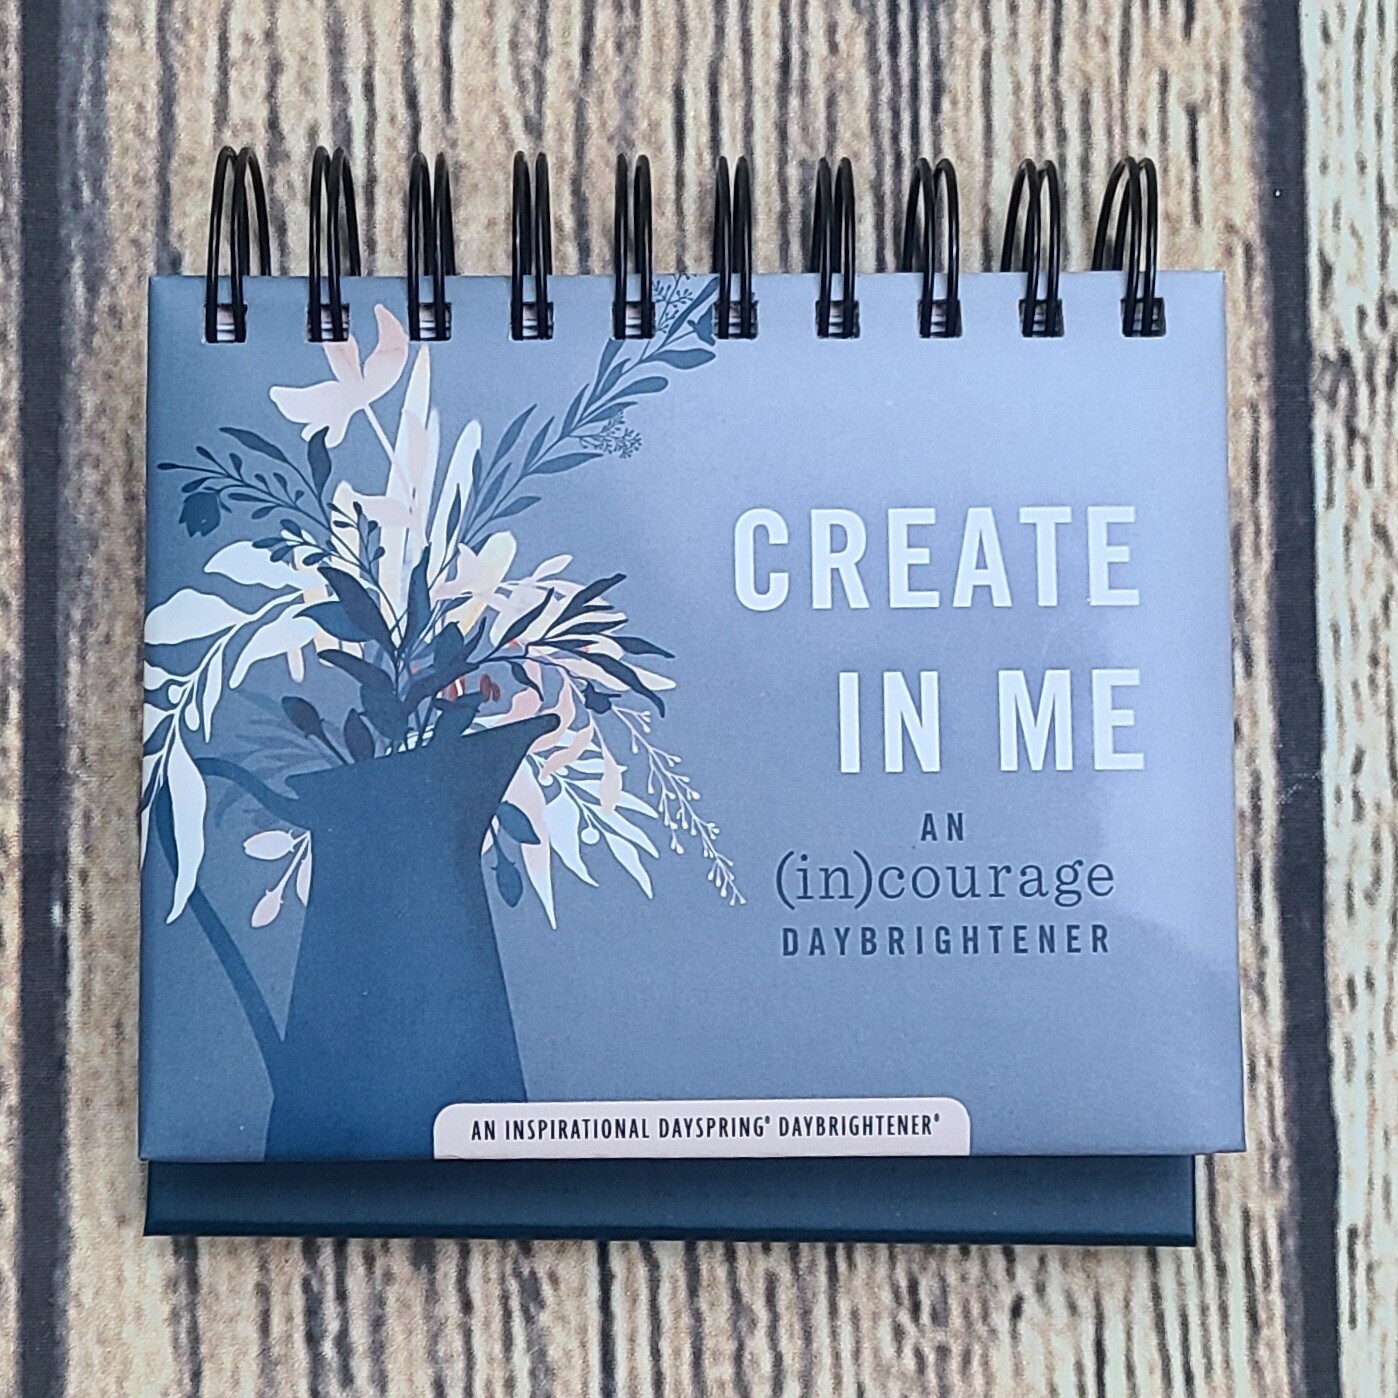 Create in Me: An (in)courage Daybrightener Perpetual Calendar